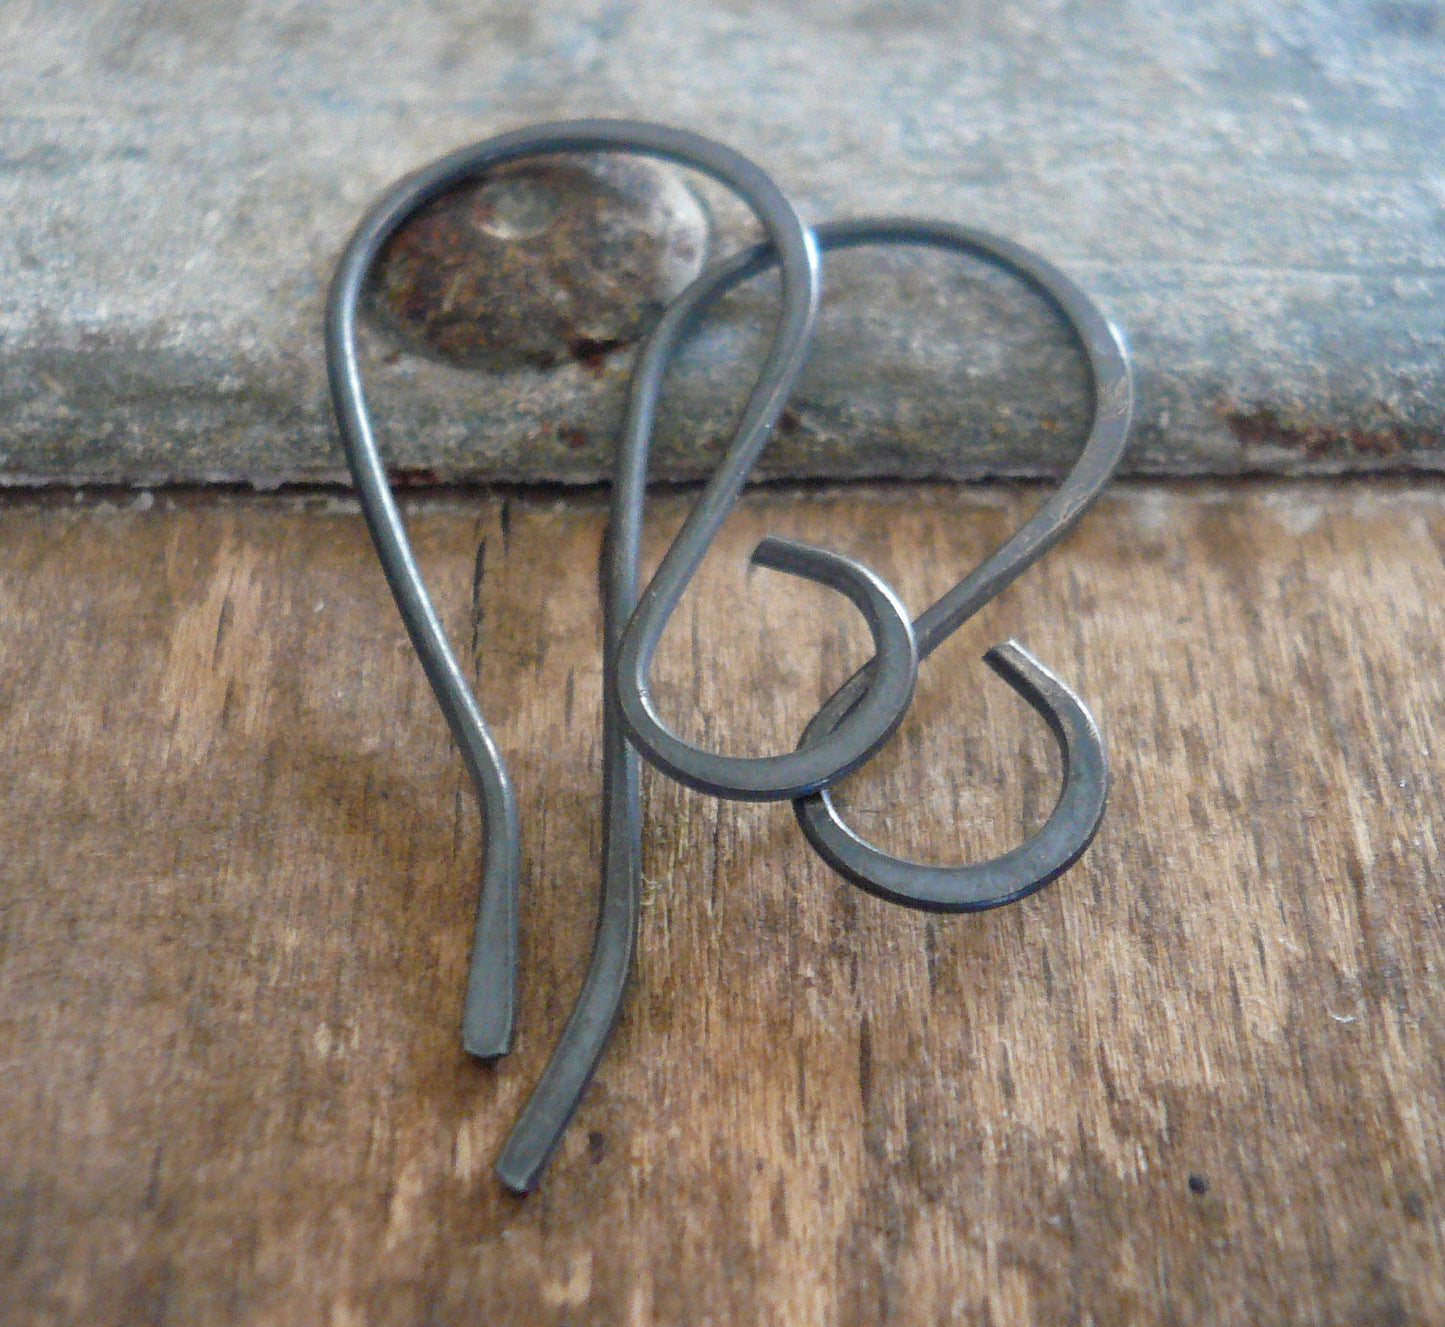 12 Pairs of my Large Loop Solitaire Sterling Silver Earwires - Handmade. Handforged. Heavily Oxidized